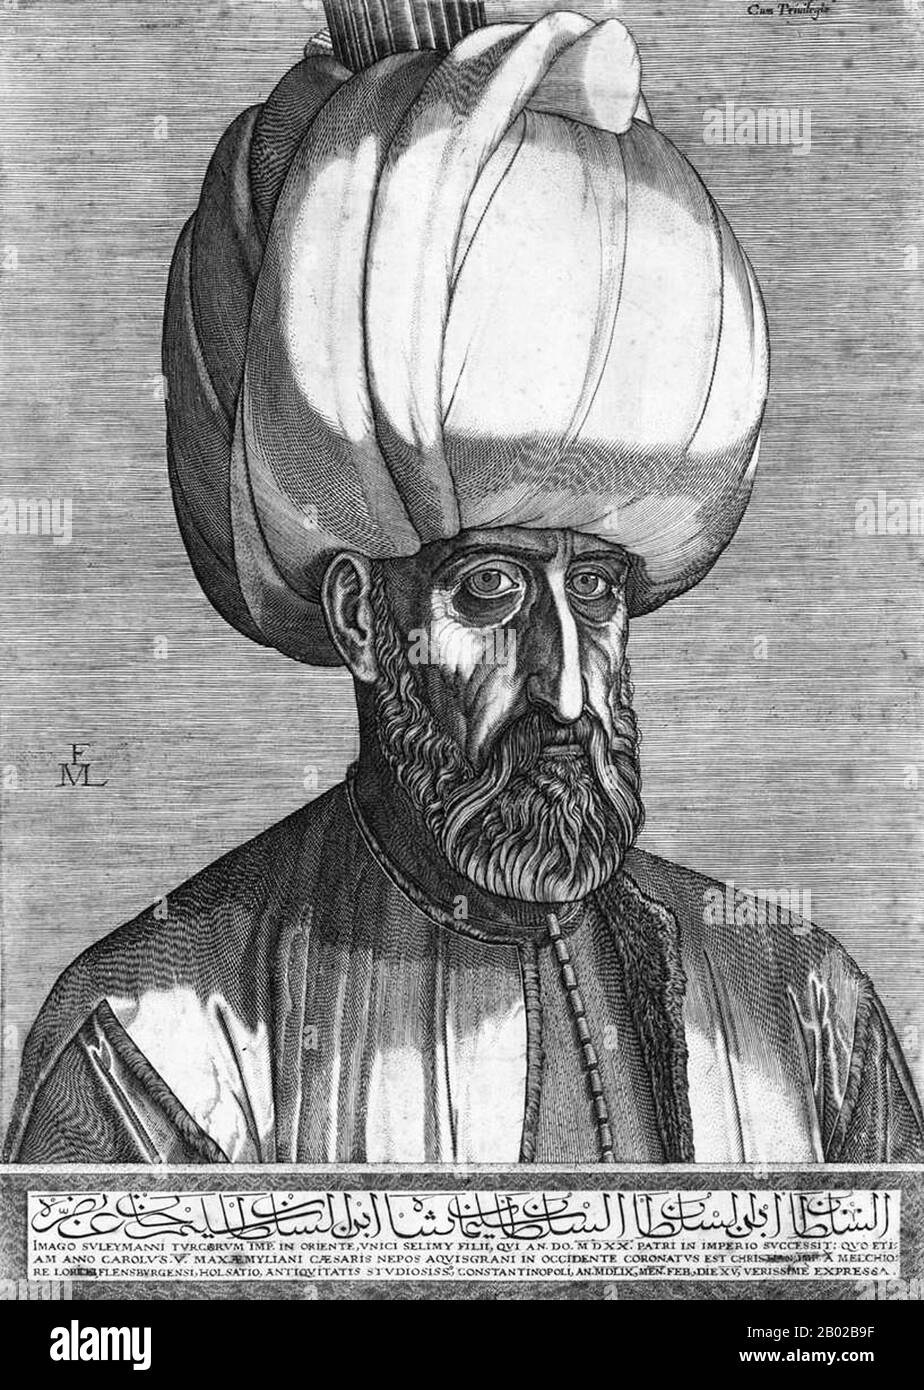 Sultan Suleyman I (1494-1566), also known as 'Suleyman the Magnificent' and 'Suleyman the Lawmaker', was the 10th and longest reigning sultan of the Ottoman empire.  He personally led his armies to conquer Transylvania, the Caspian, much of the Middle East and the Maghreb. He intoduced sweeping reforms in Turkish legislation, education, taxation and criminal law, and was highly respected as a poet and a goldsmith. Suleyman also oversaw a golden age in the development of arts, literature and architecture in the Ottoman empire. Stock Photo